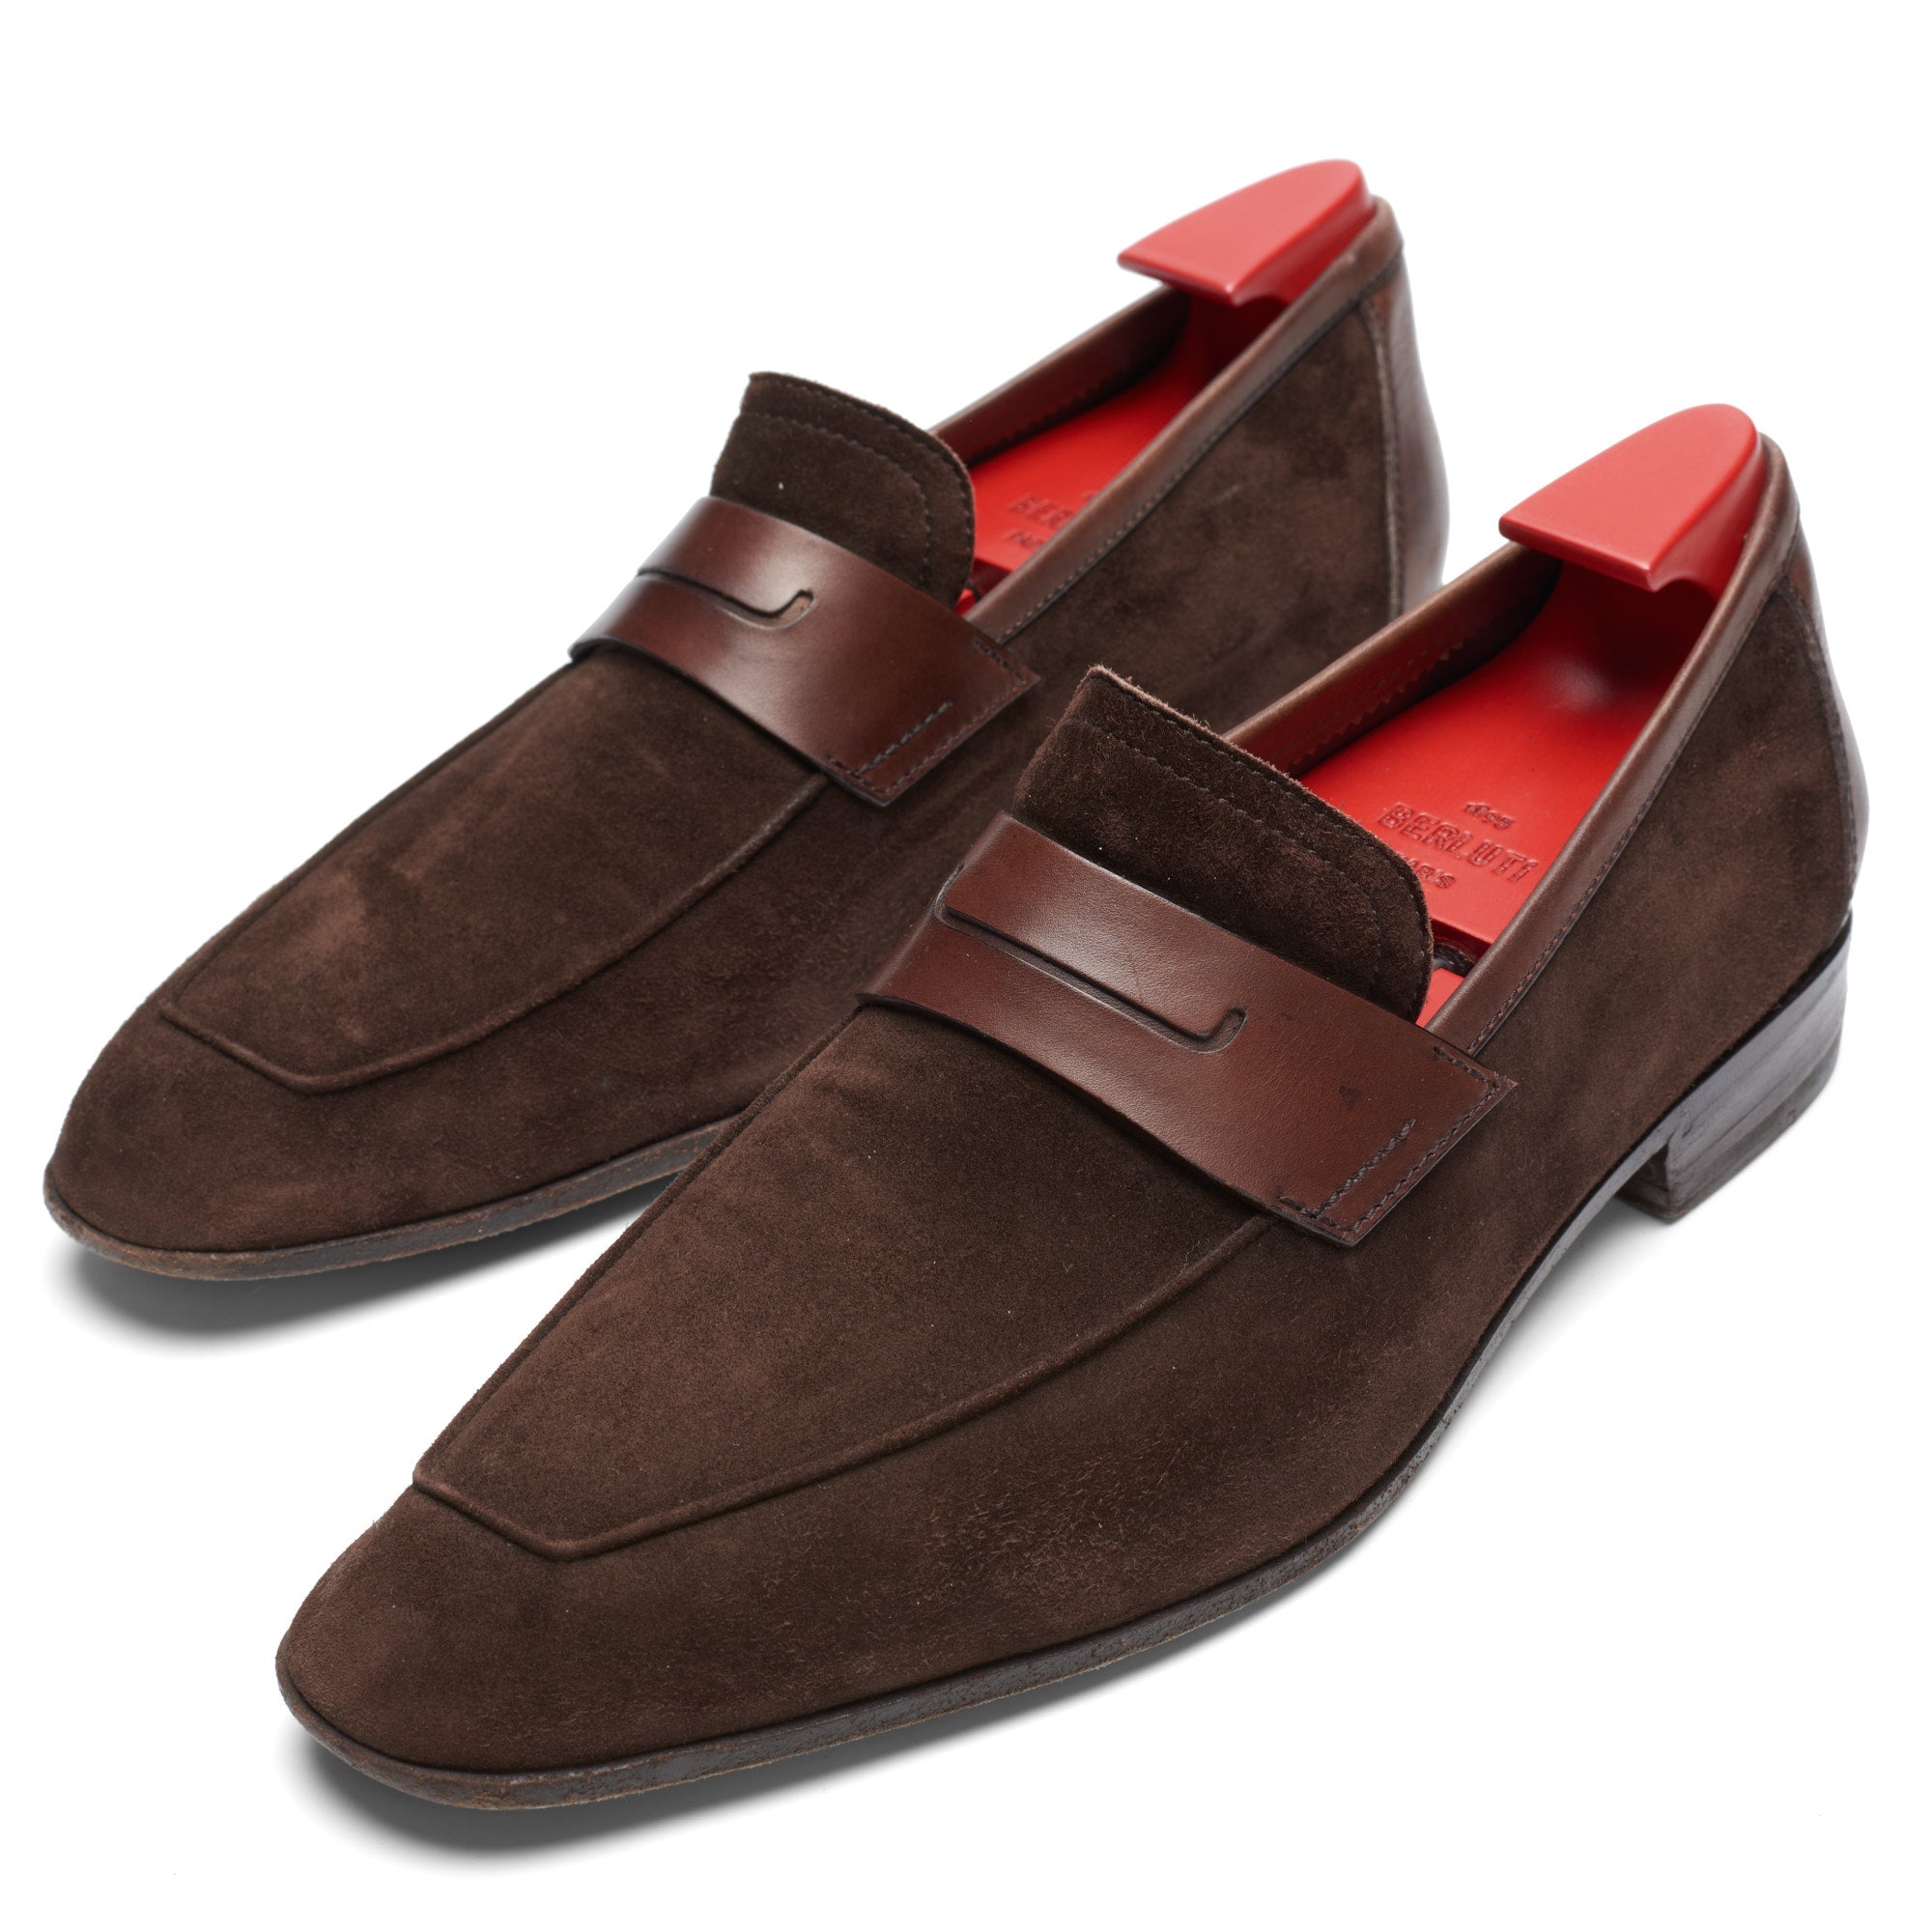 BERLUTI Paris Lorenzo Brown Suede Leather Unlined Penny Loafer Shoes UK 8 US 9 BERLUTI